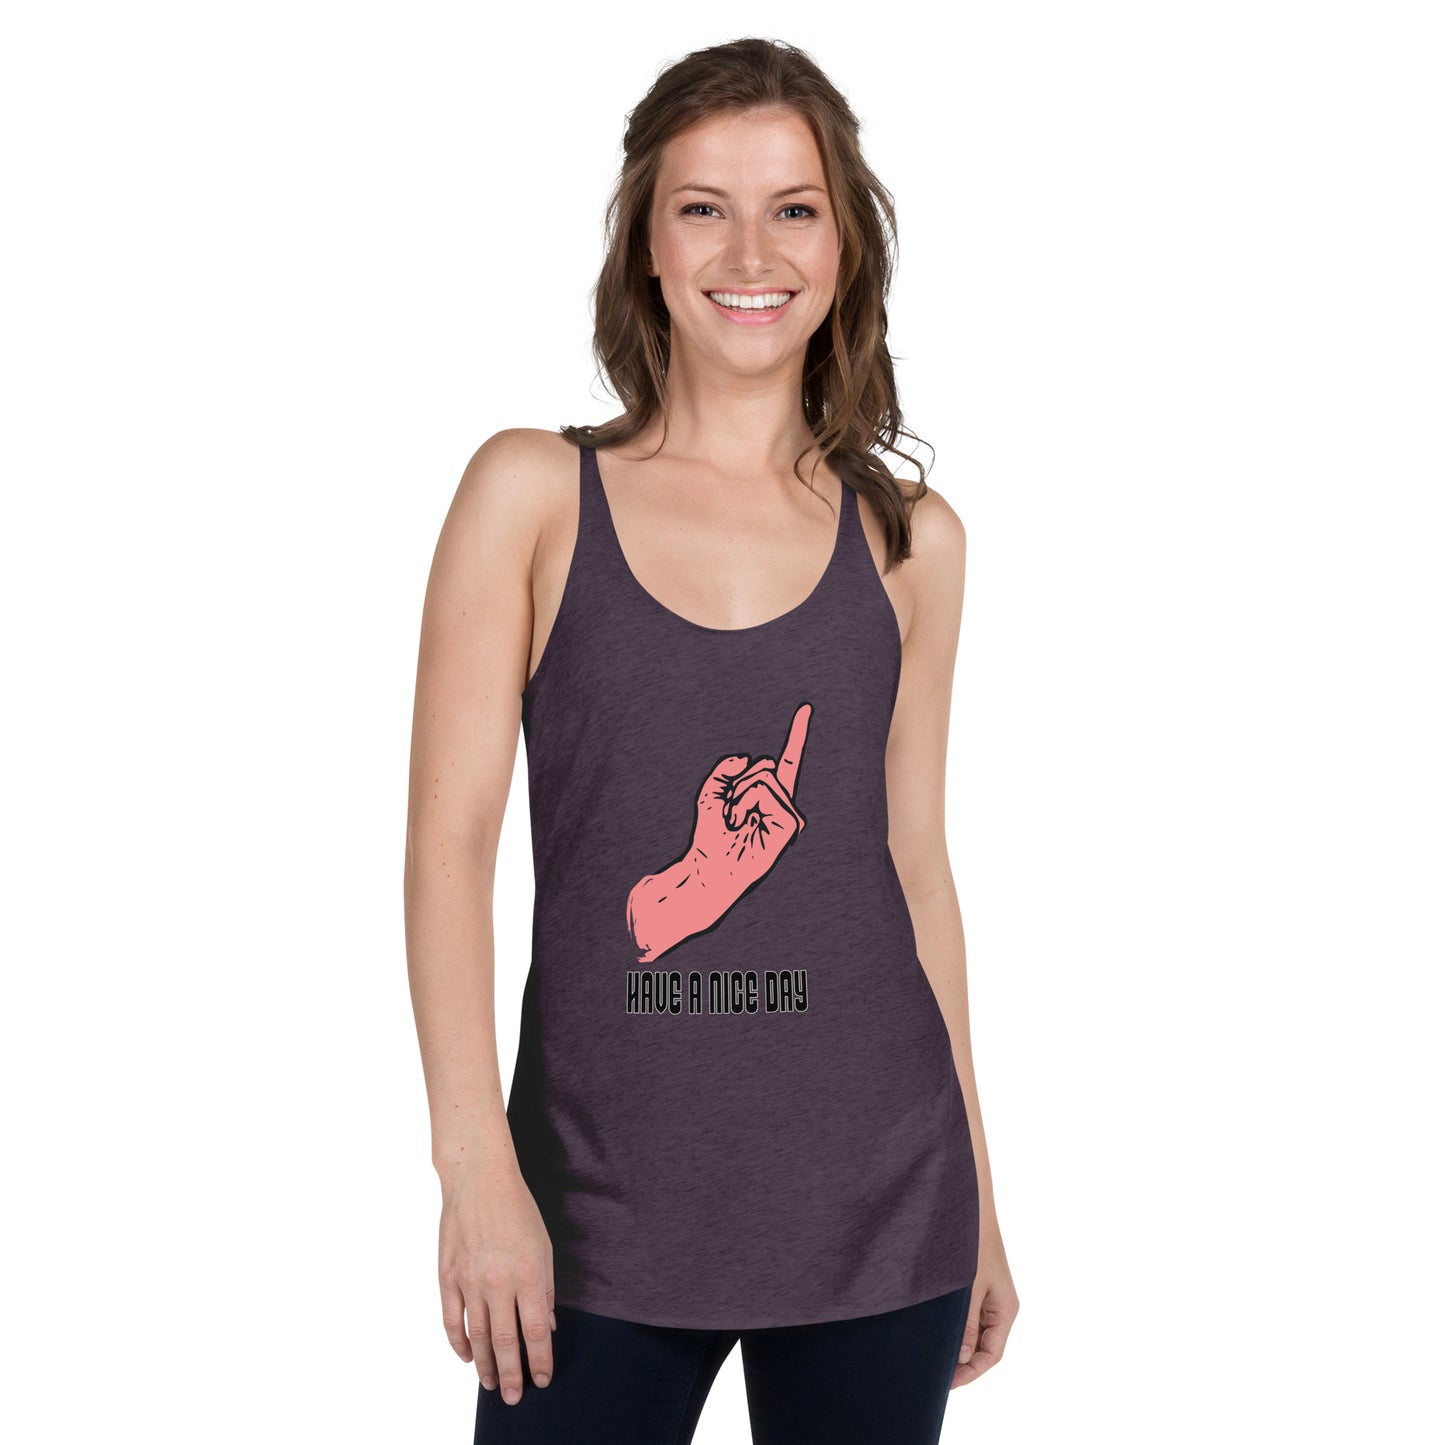 Have a Nice Day Women's Racerback Tank